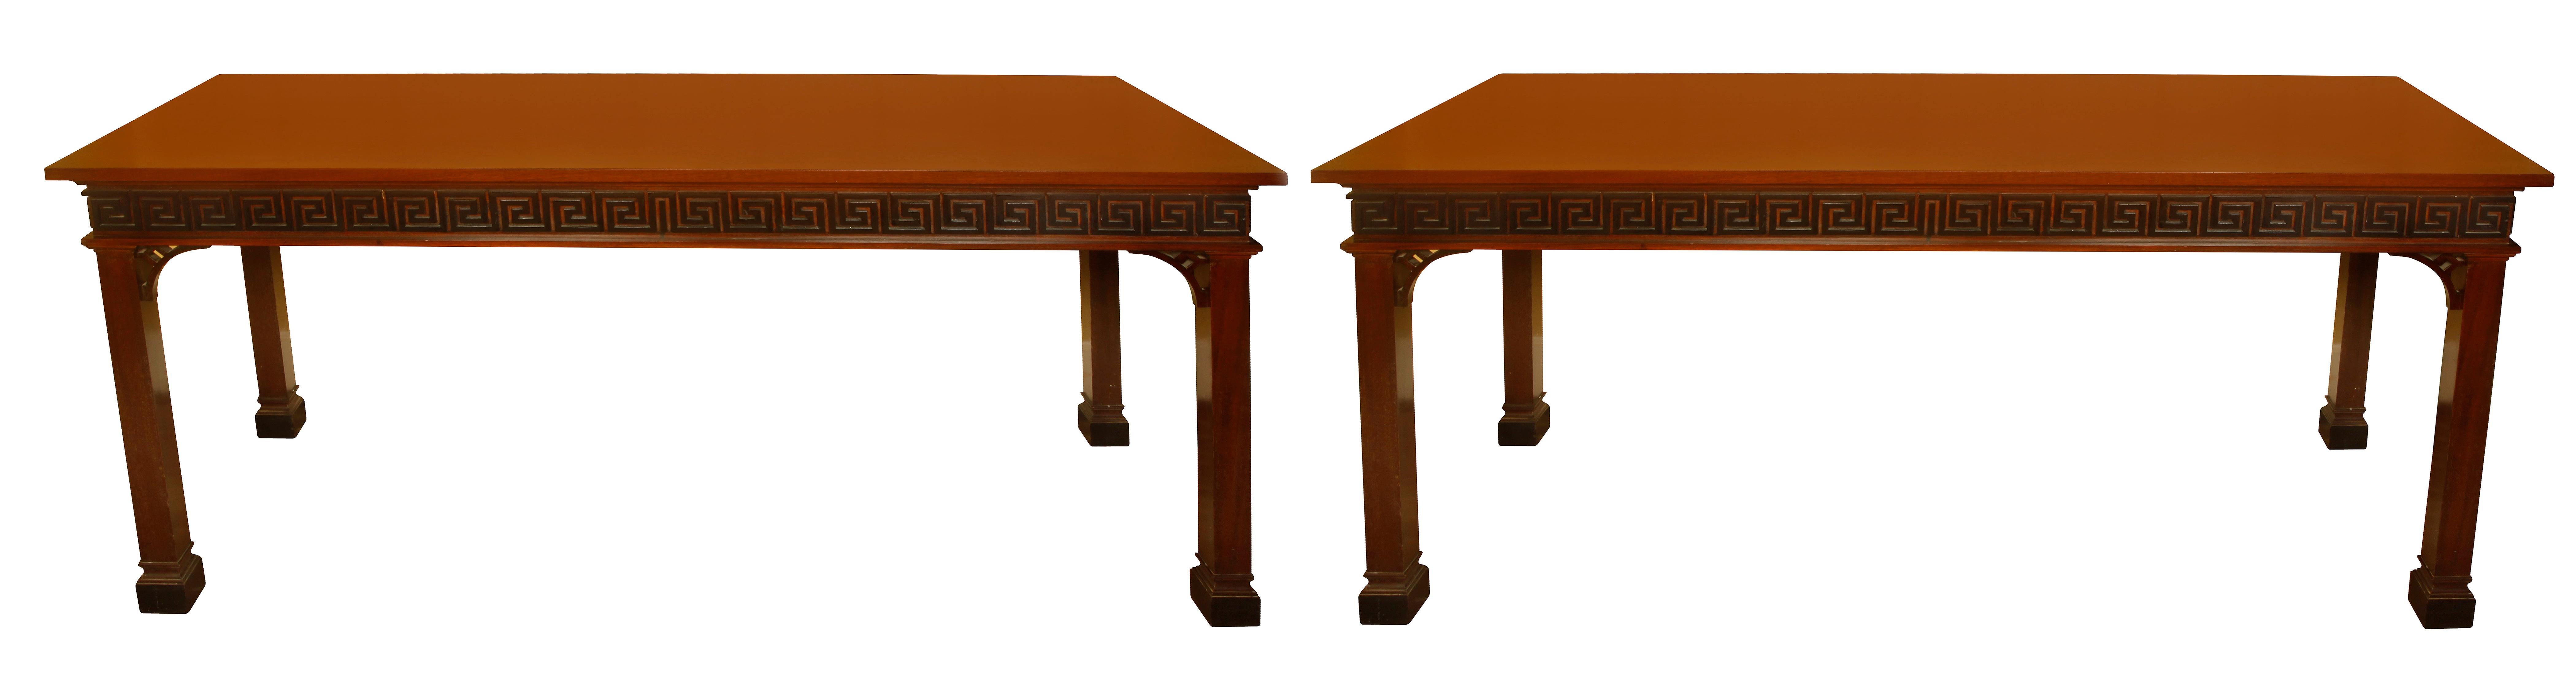 20th Century Chinese Chippendale English Mahogany Console